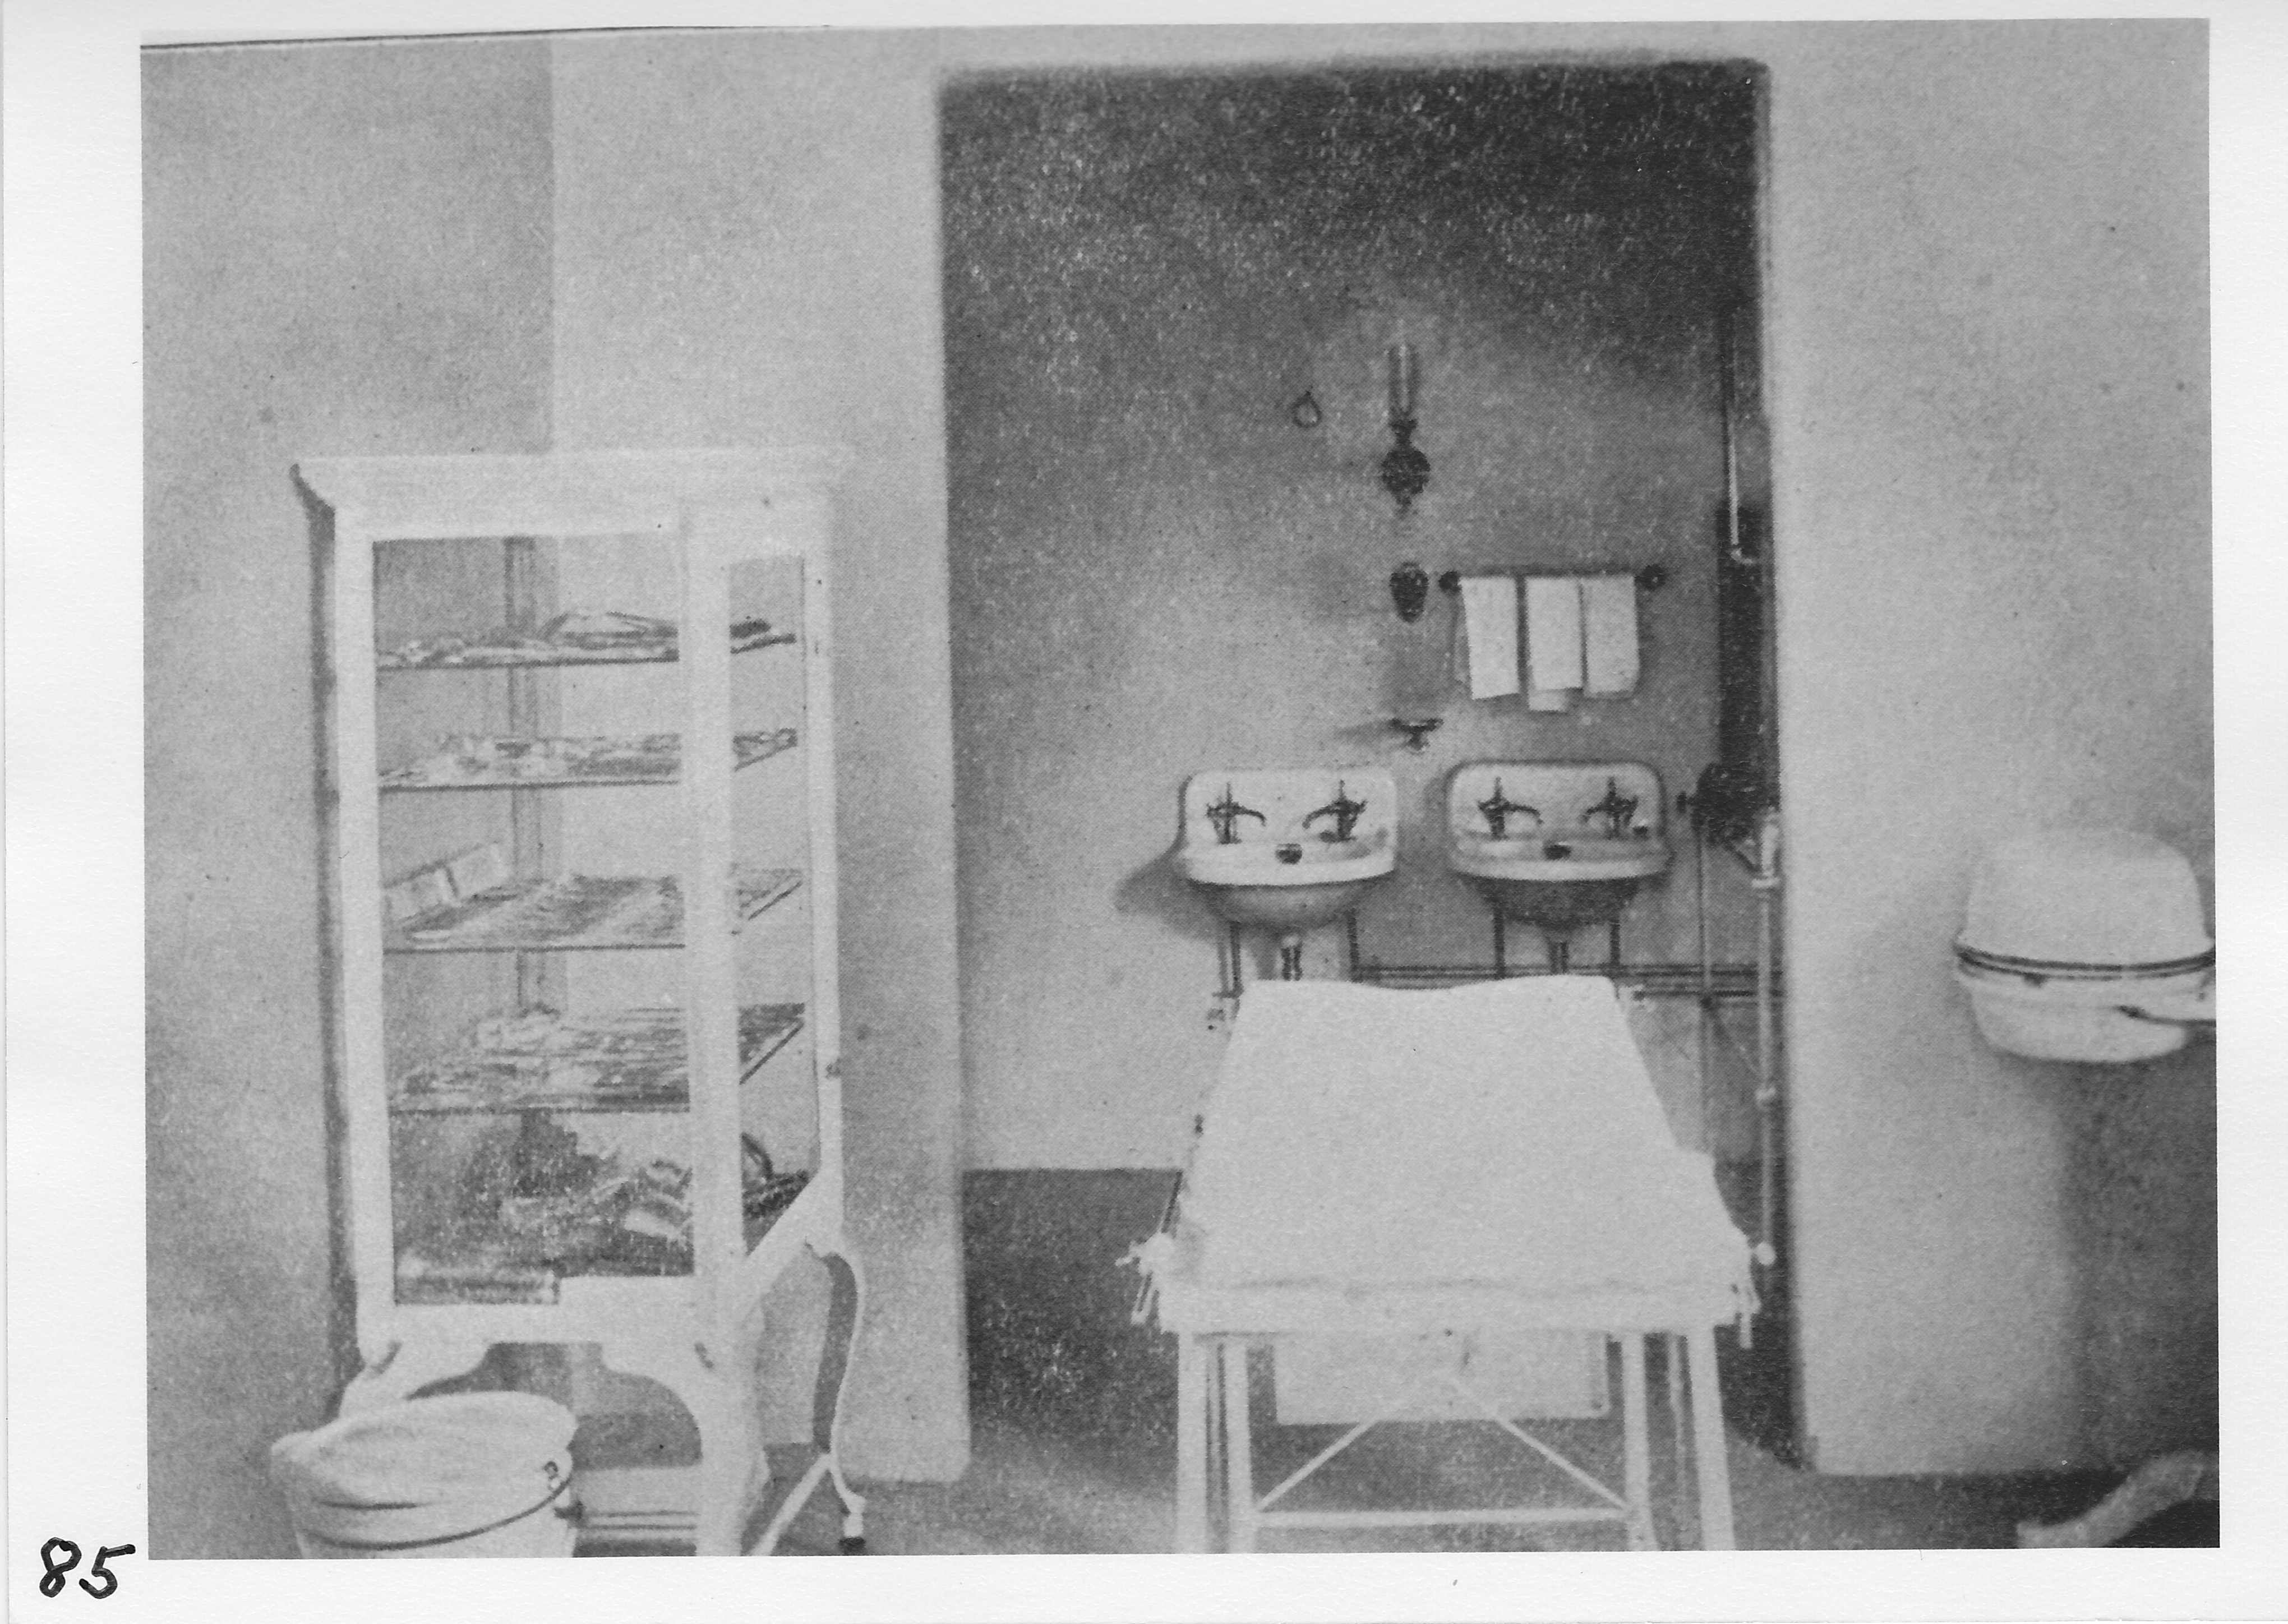 The operating room Hal C. Blair Memorial Hospital — the first private hospital in Lenawee County.